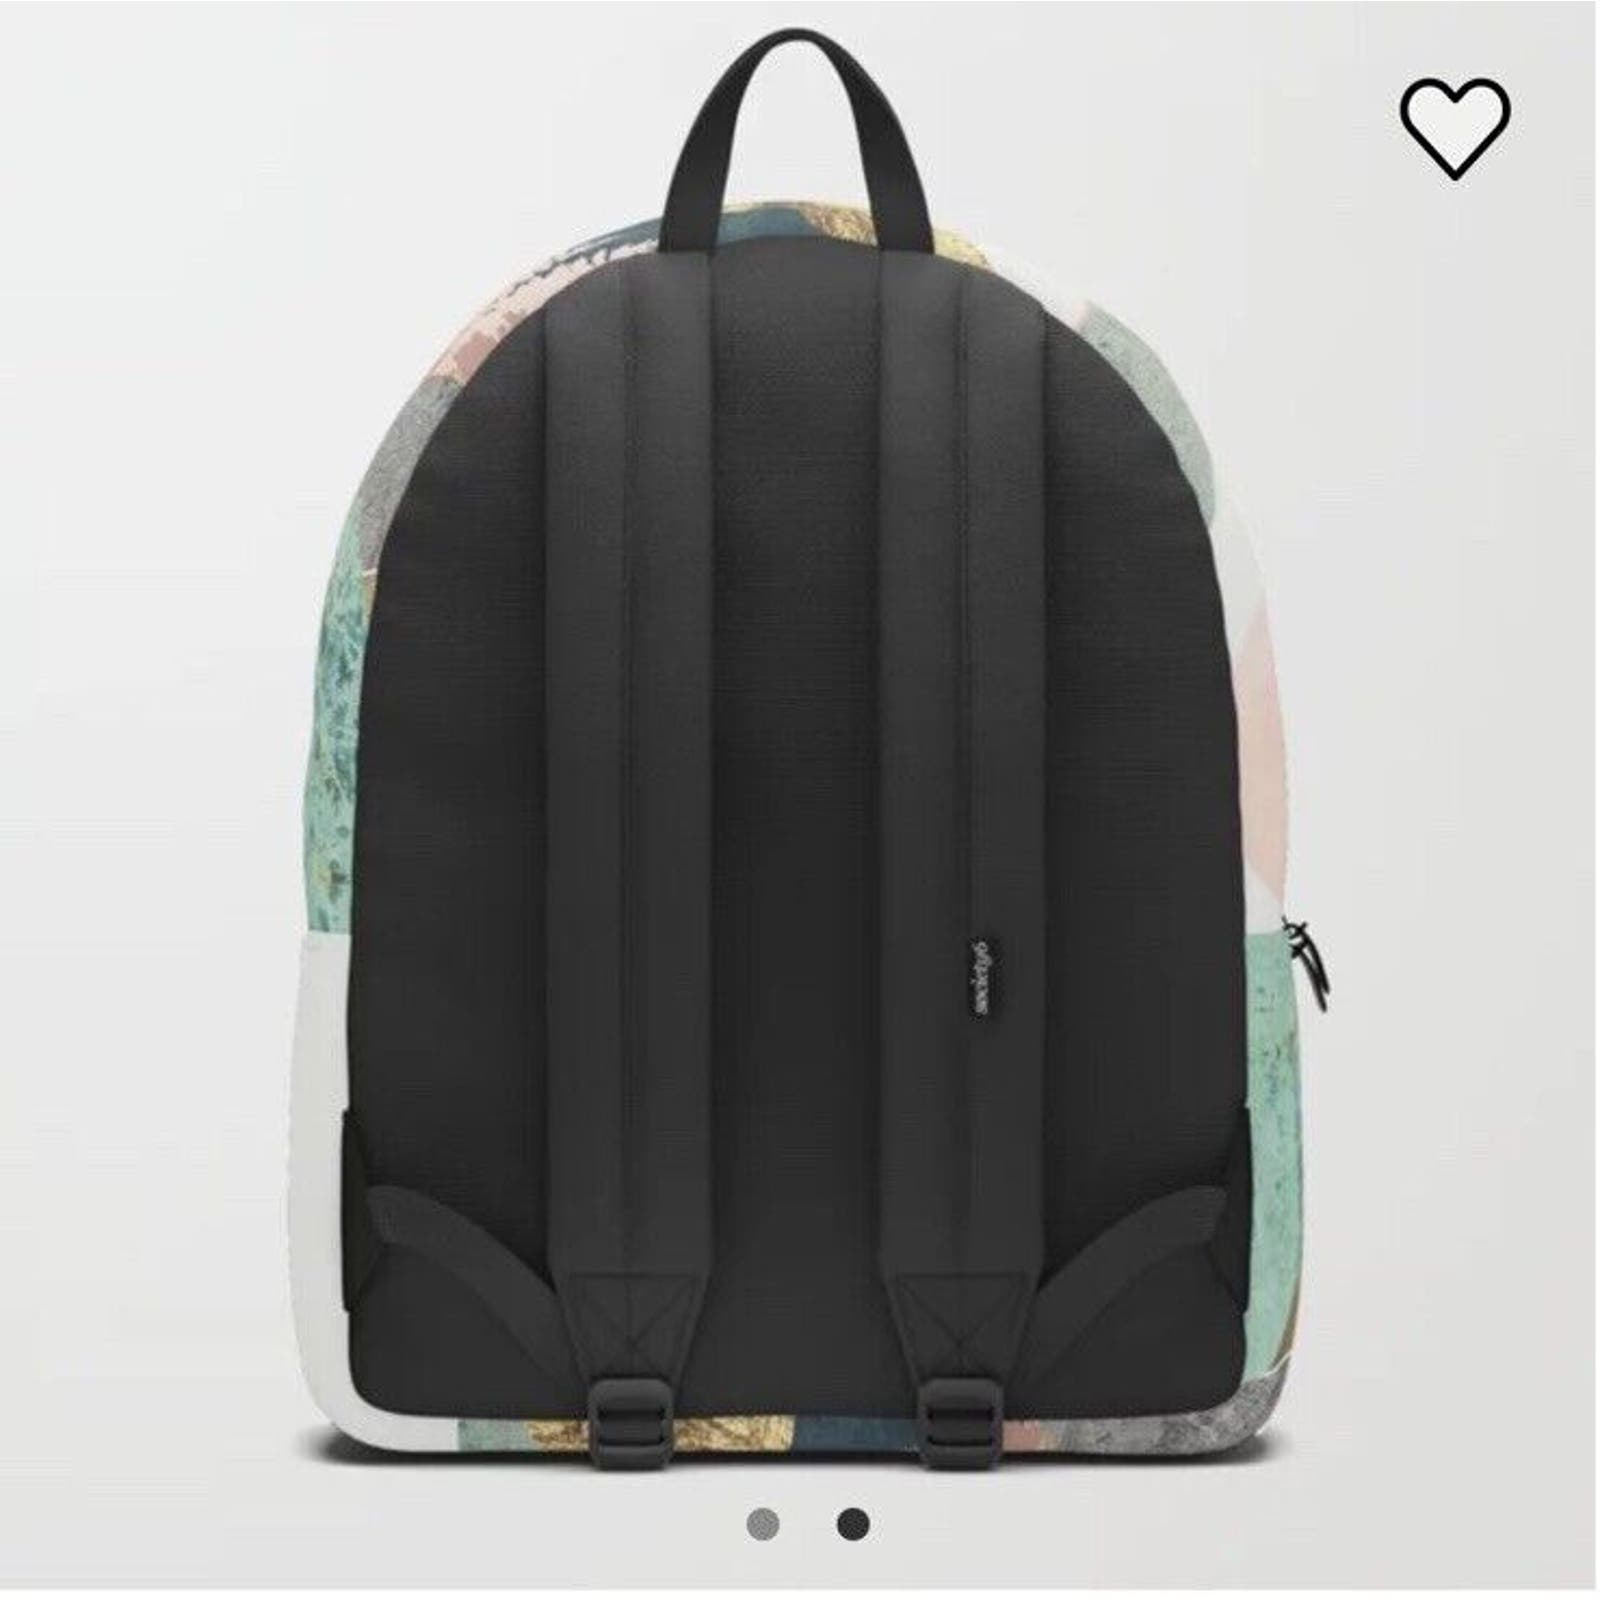 Society6 Summer Vista Backpack Mountains Outdoors Forest Laptop School Bag